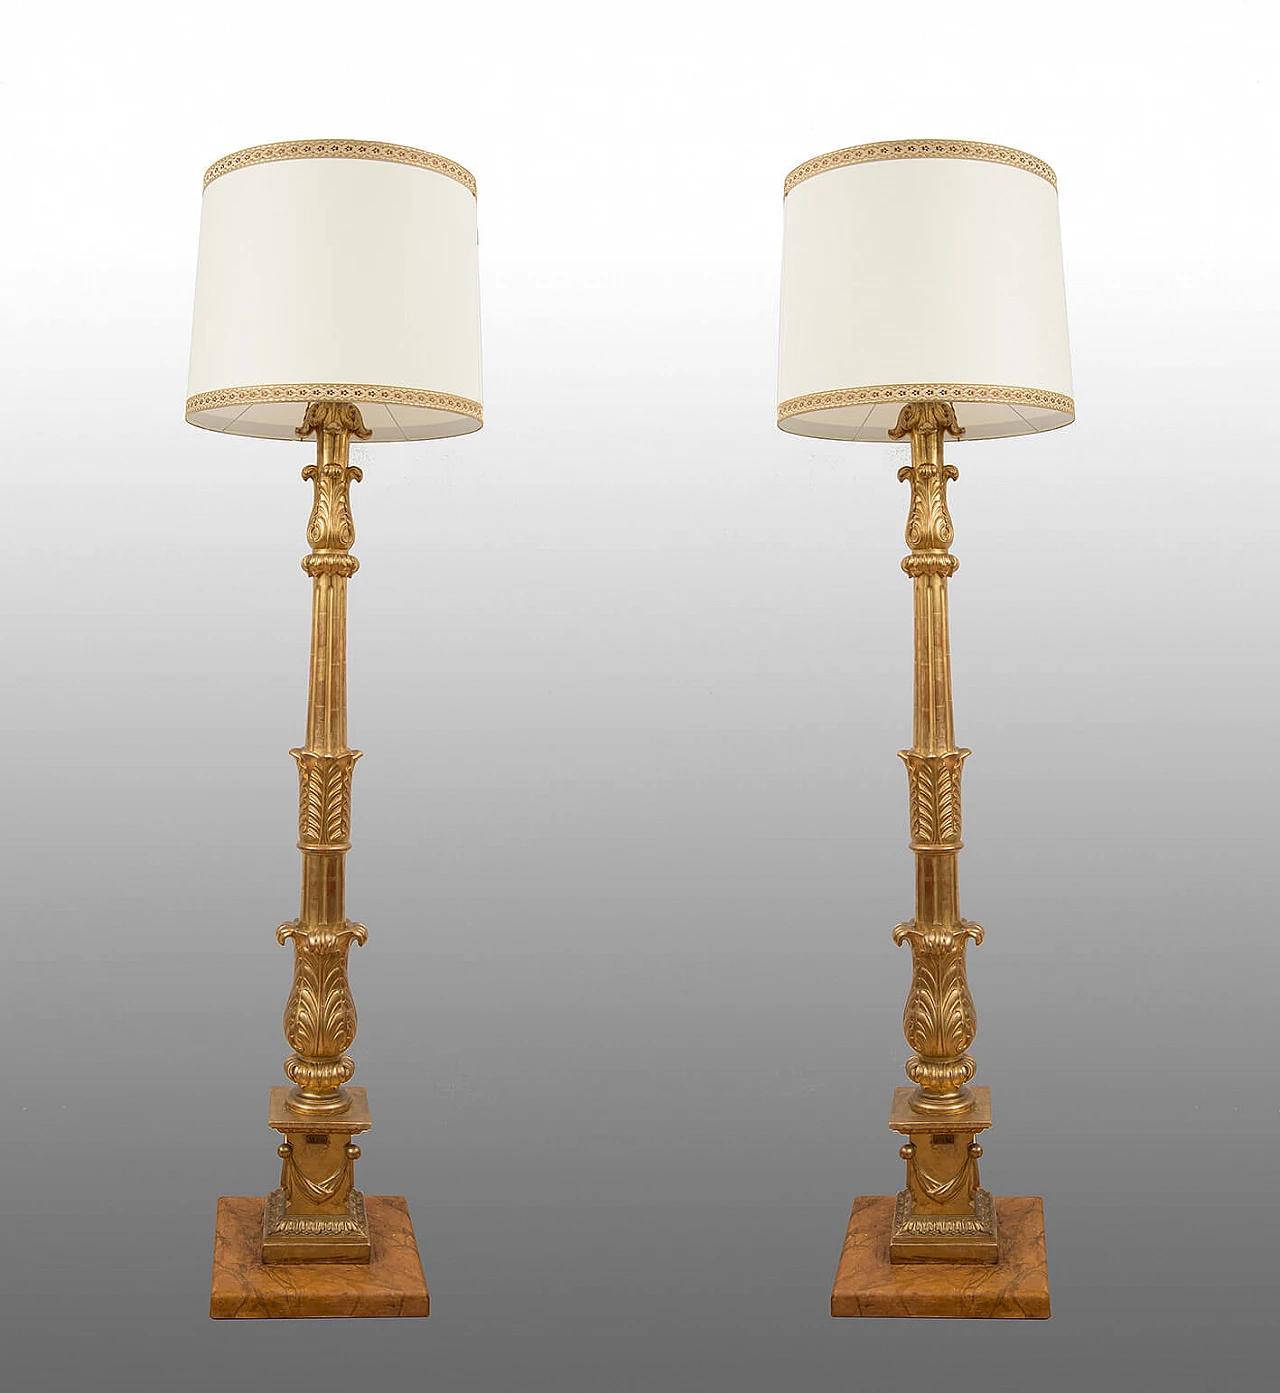 Pair of Empire gilded and carved wooden floor lamps, early 19th century 1